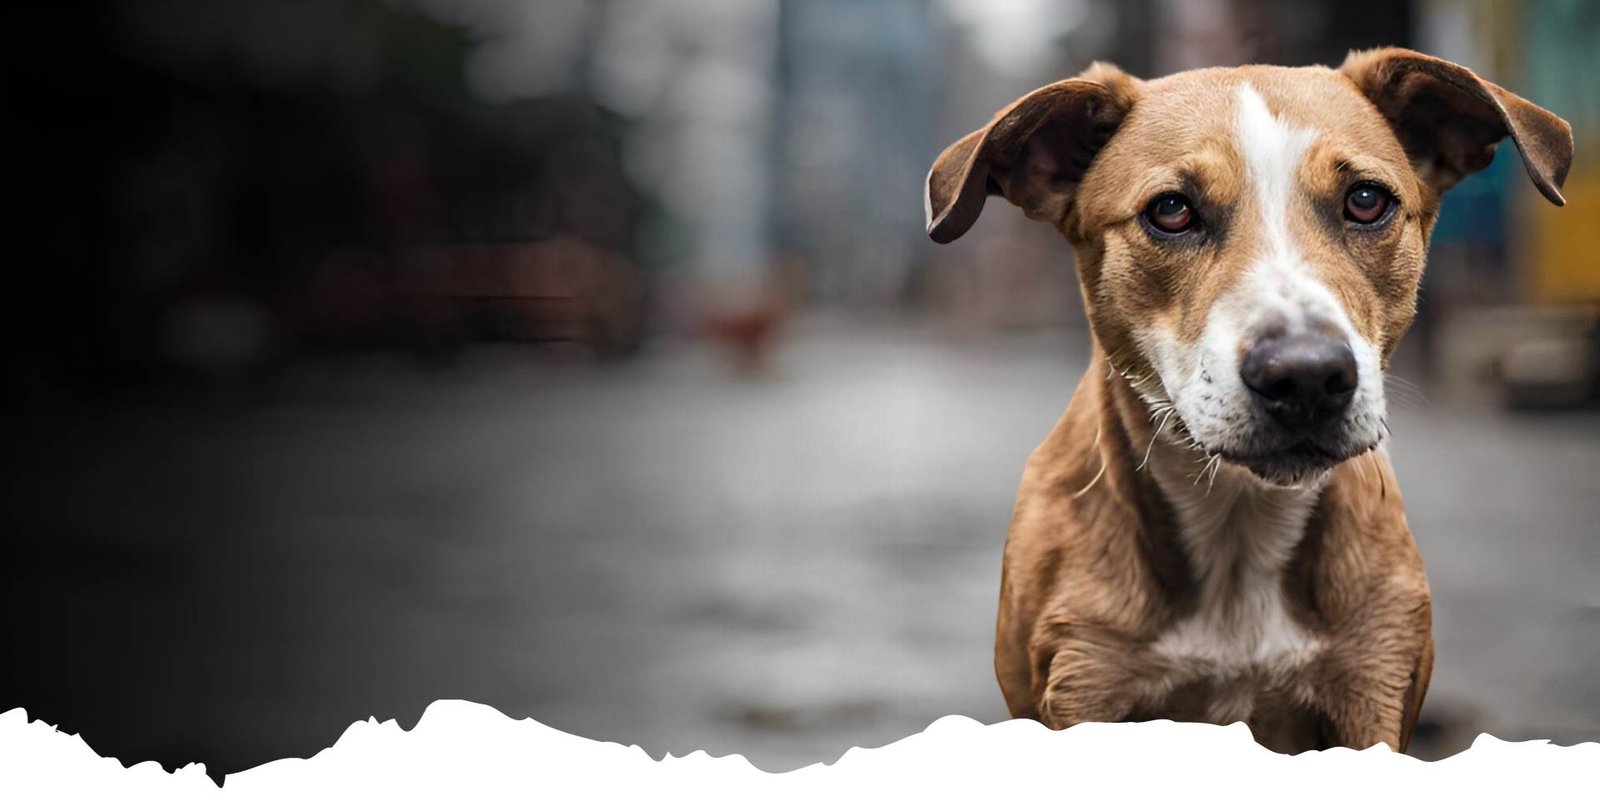 NGOs for Stray Dogs and Animals